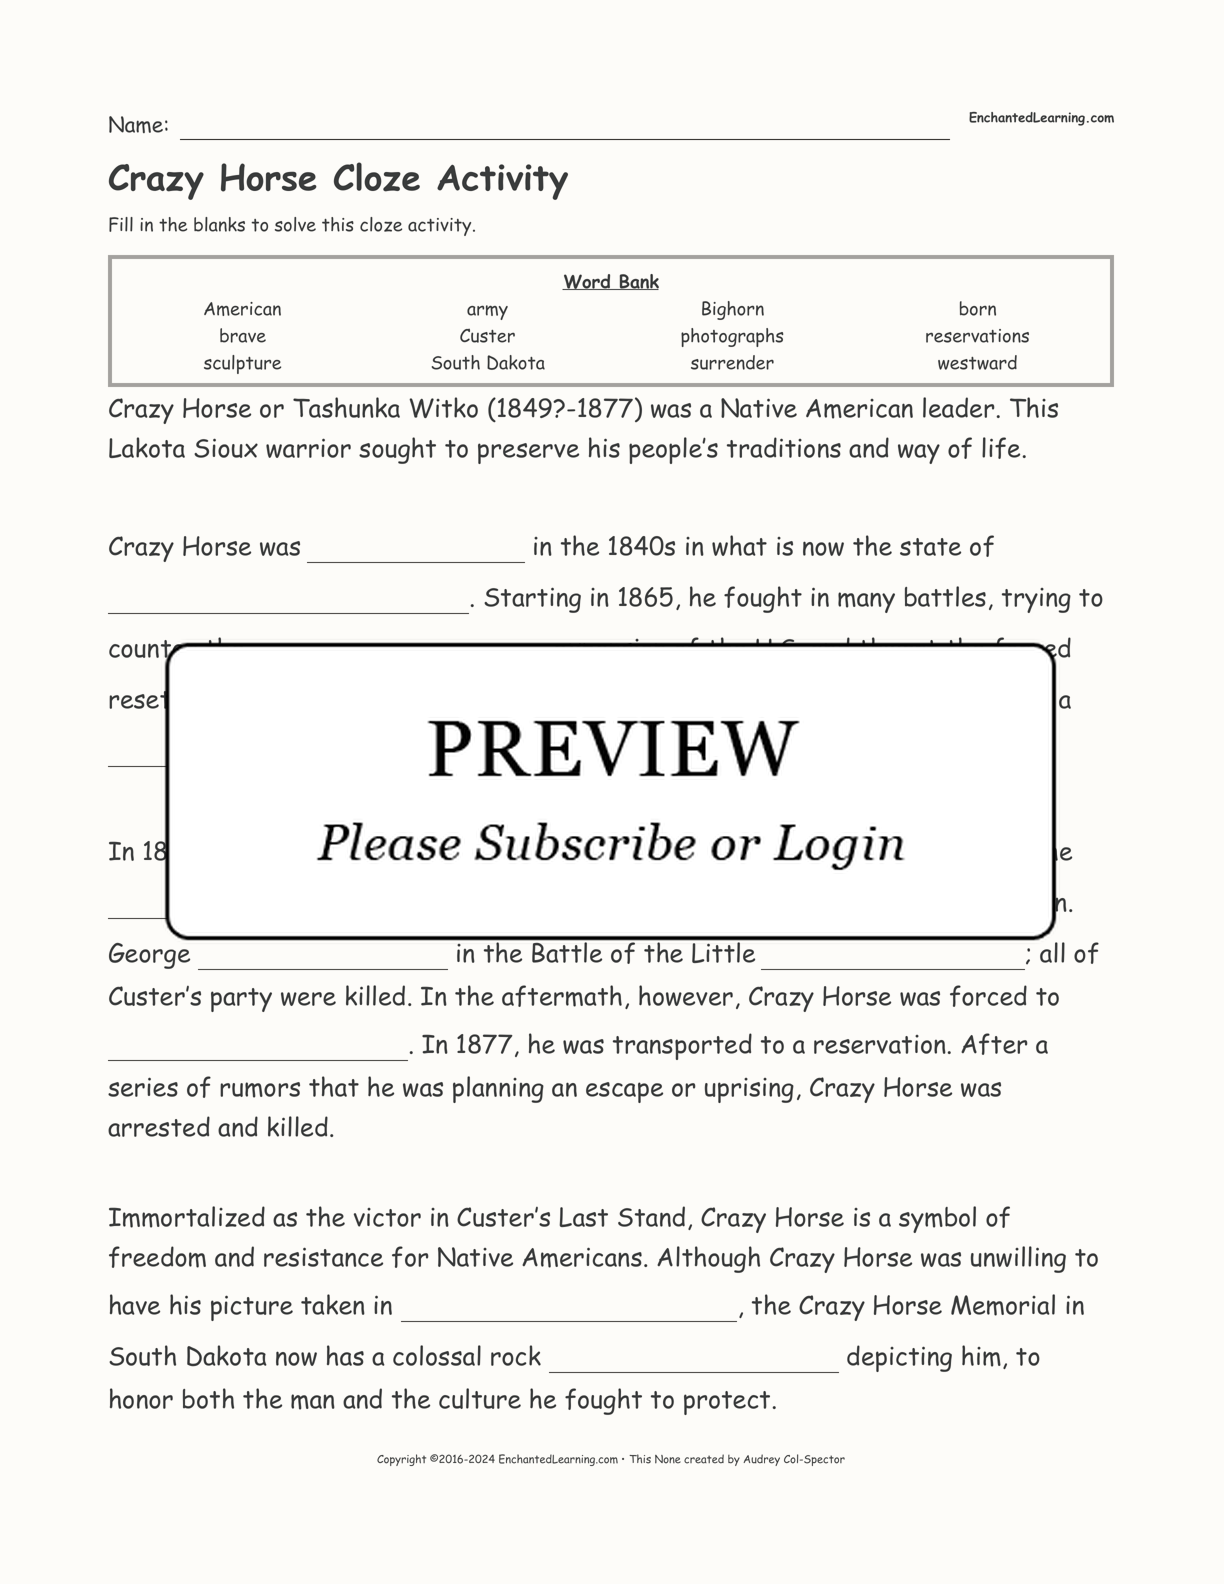 Crazy Horse Cloze Activity interactive worksheet page 1